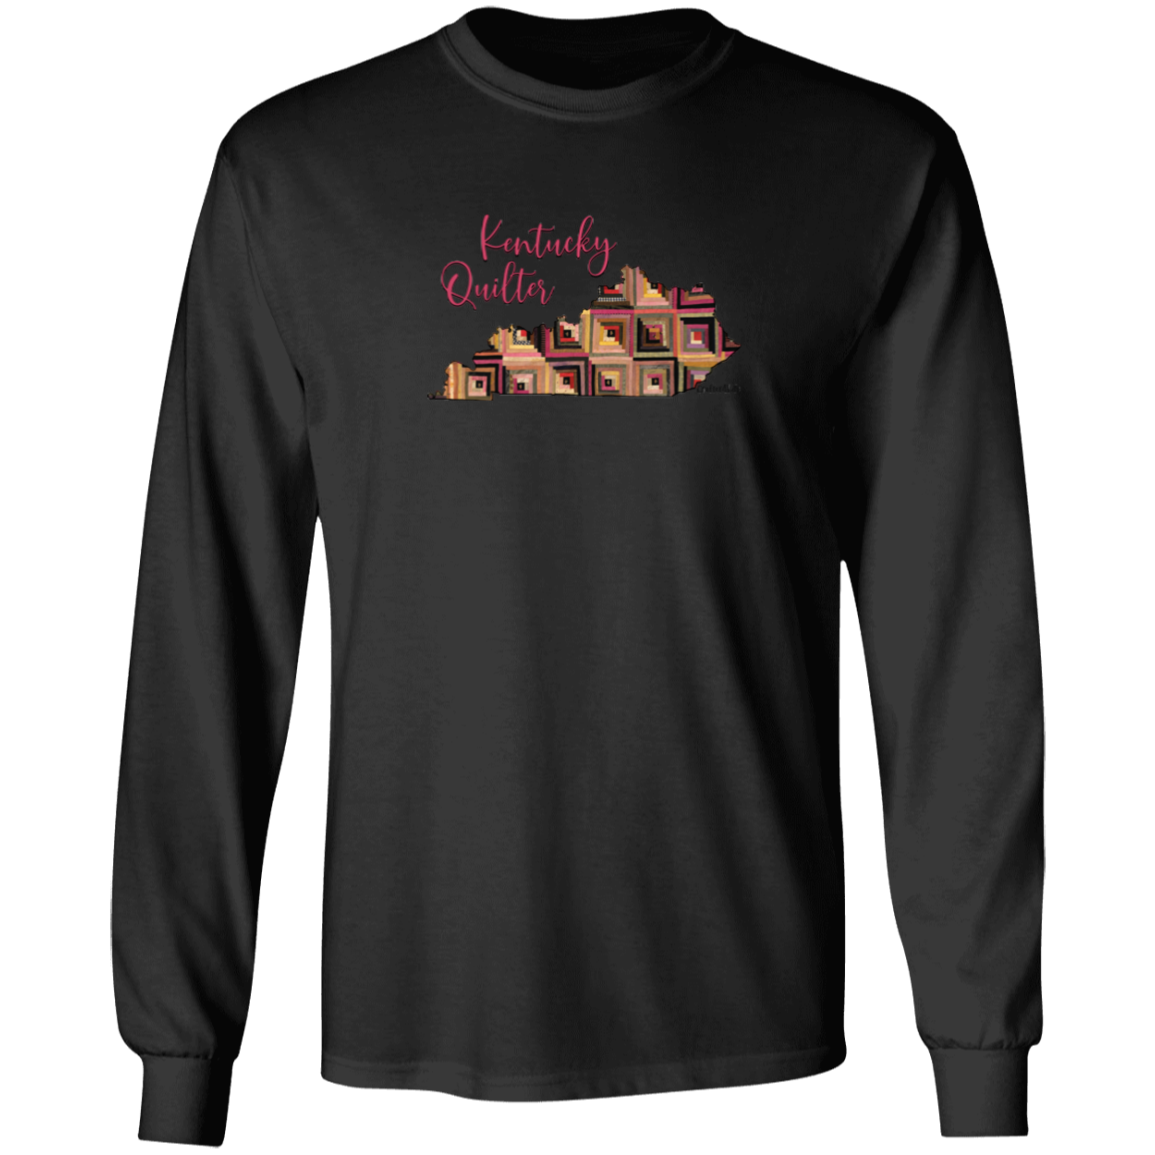 Kentucky Quilter Long Sleeve T-Shirt, Gift for Quilting Friends and Family